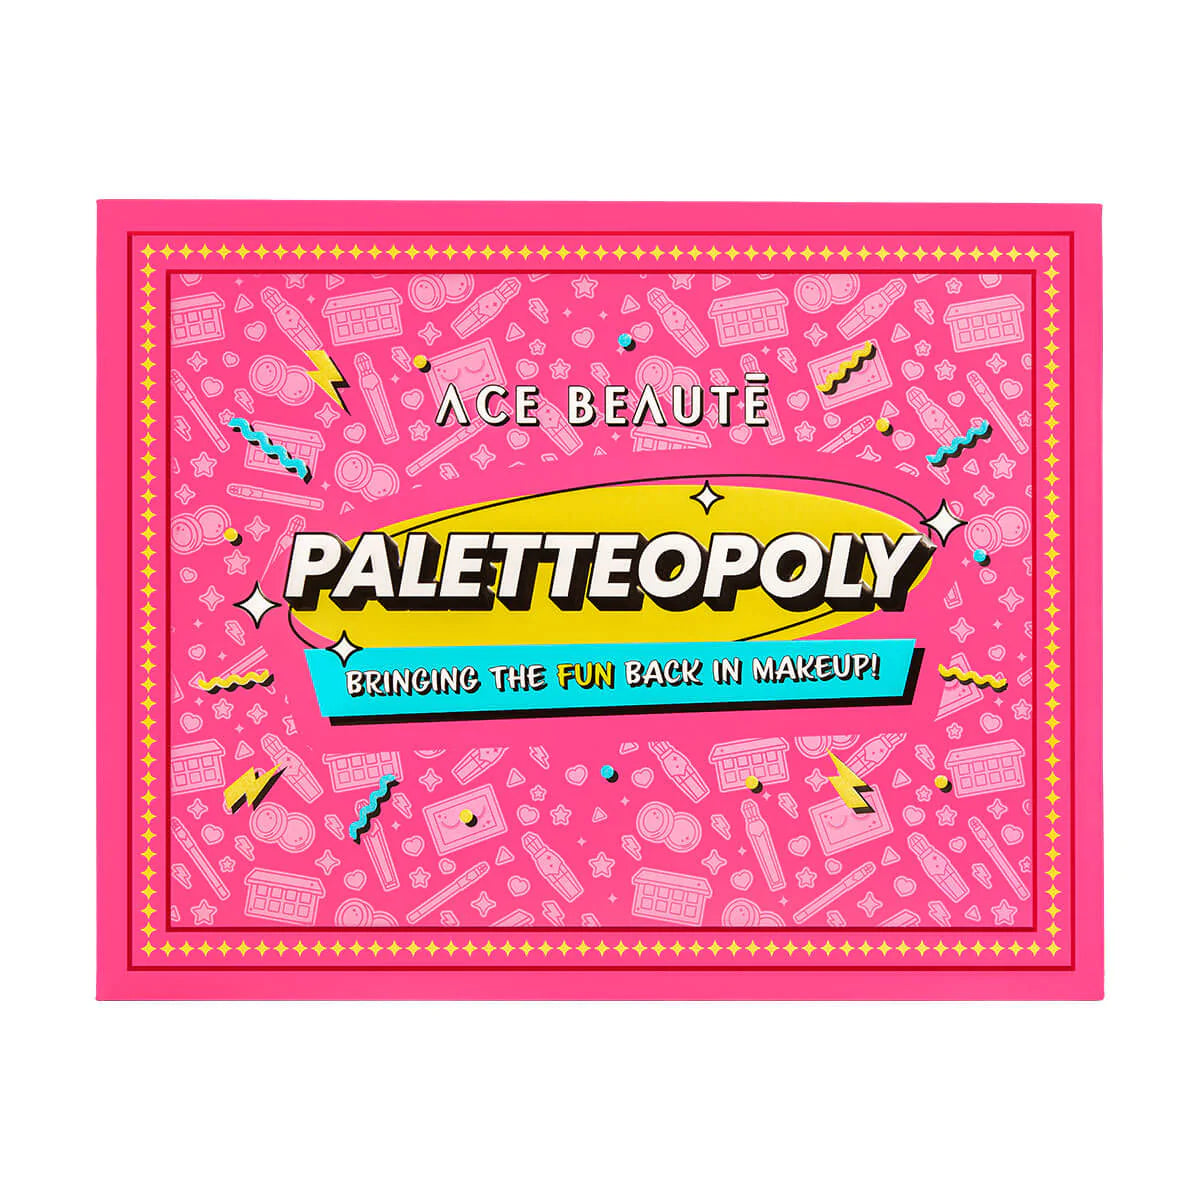 Ace Beaute - Paletteopoly Full Collection